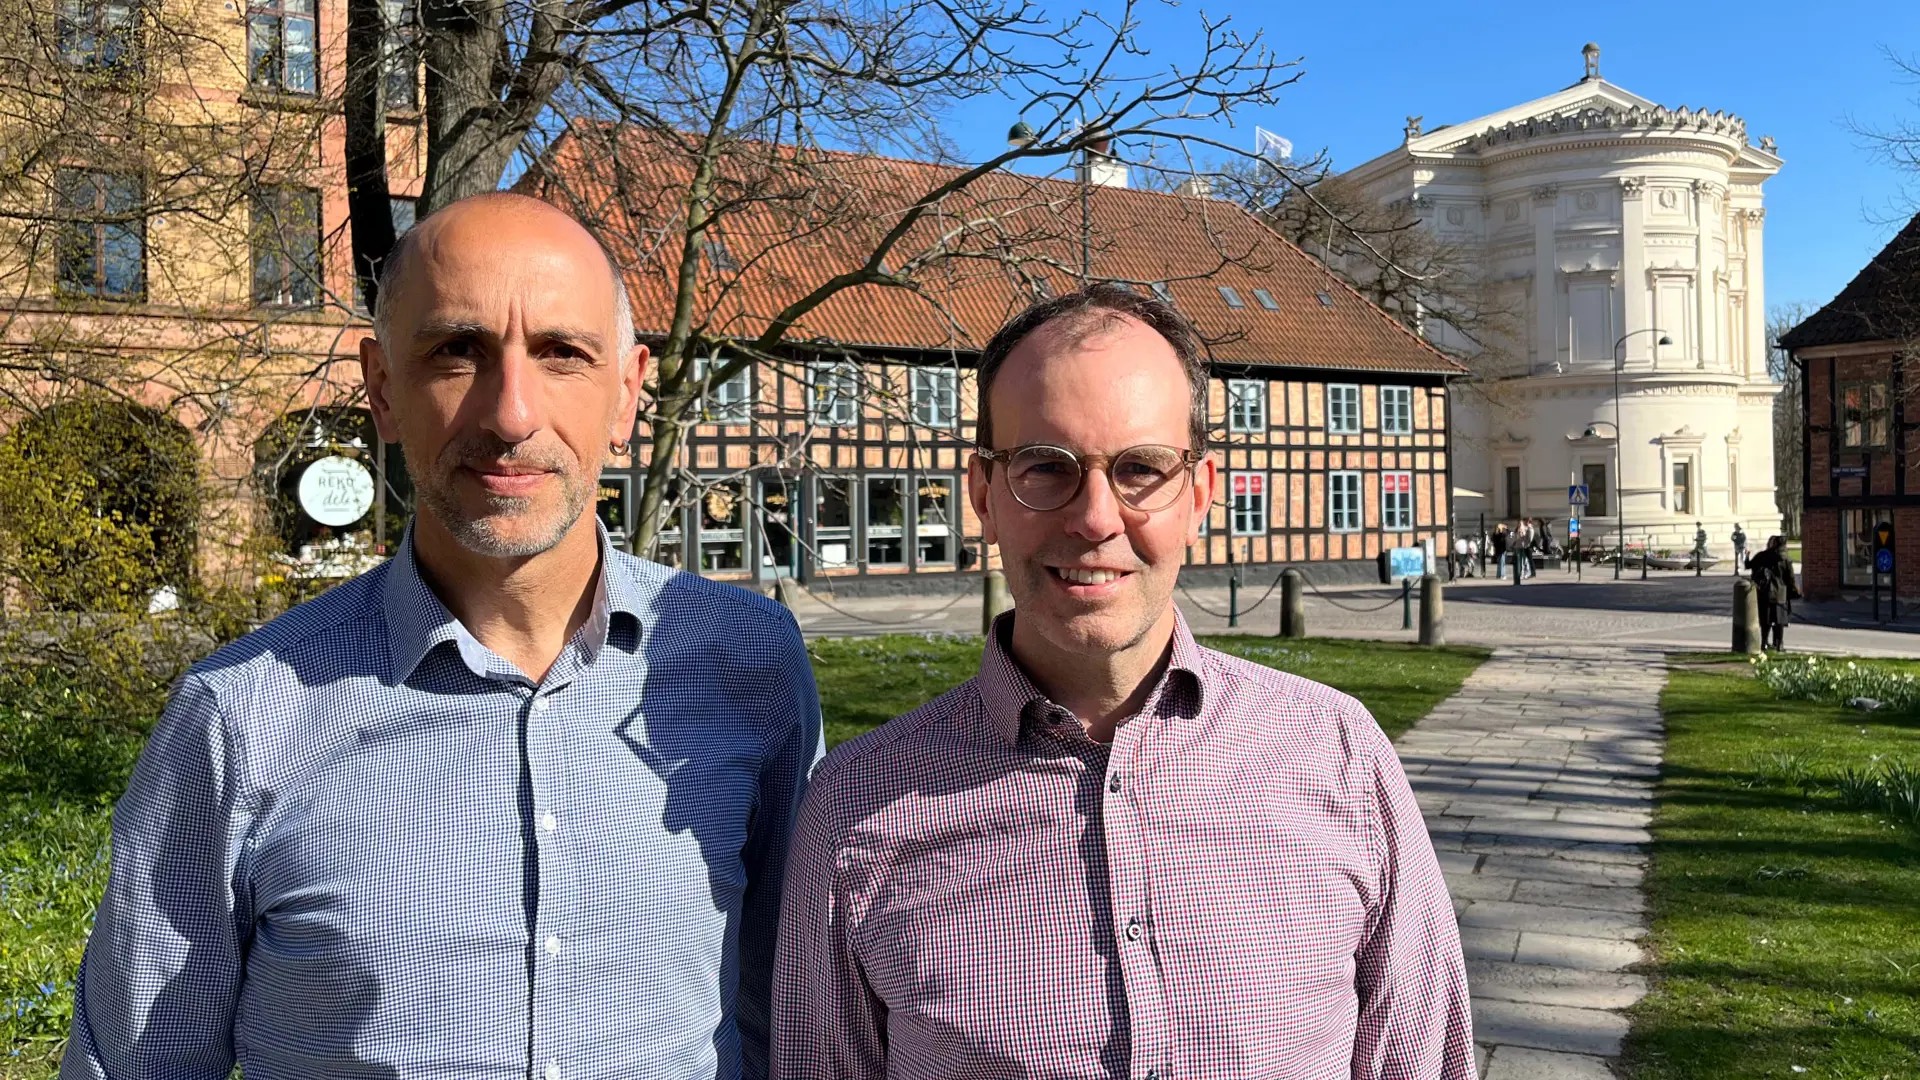 Outdoor photo of Joachim Rodrigues and Christian Fager.